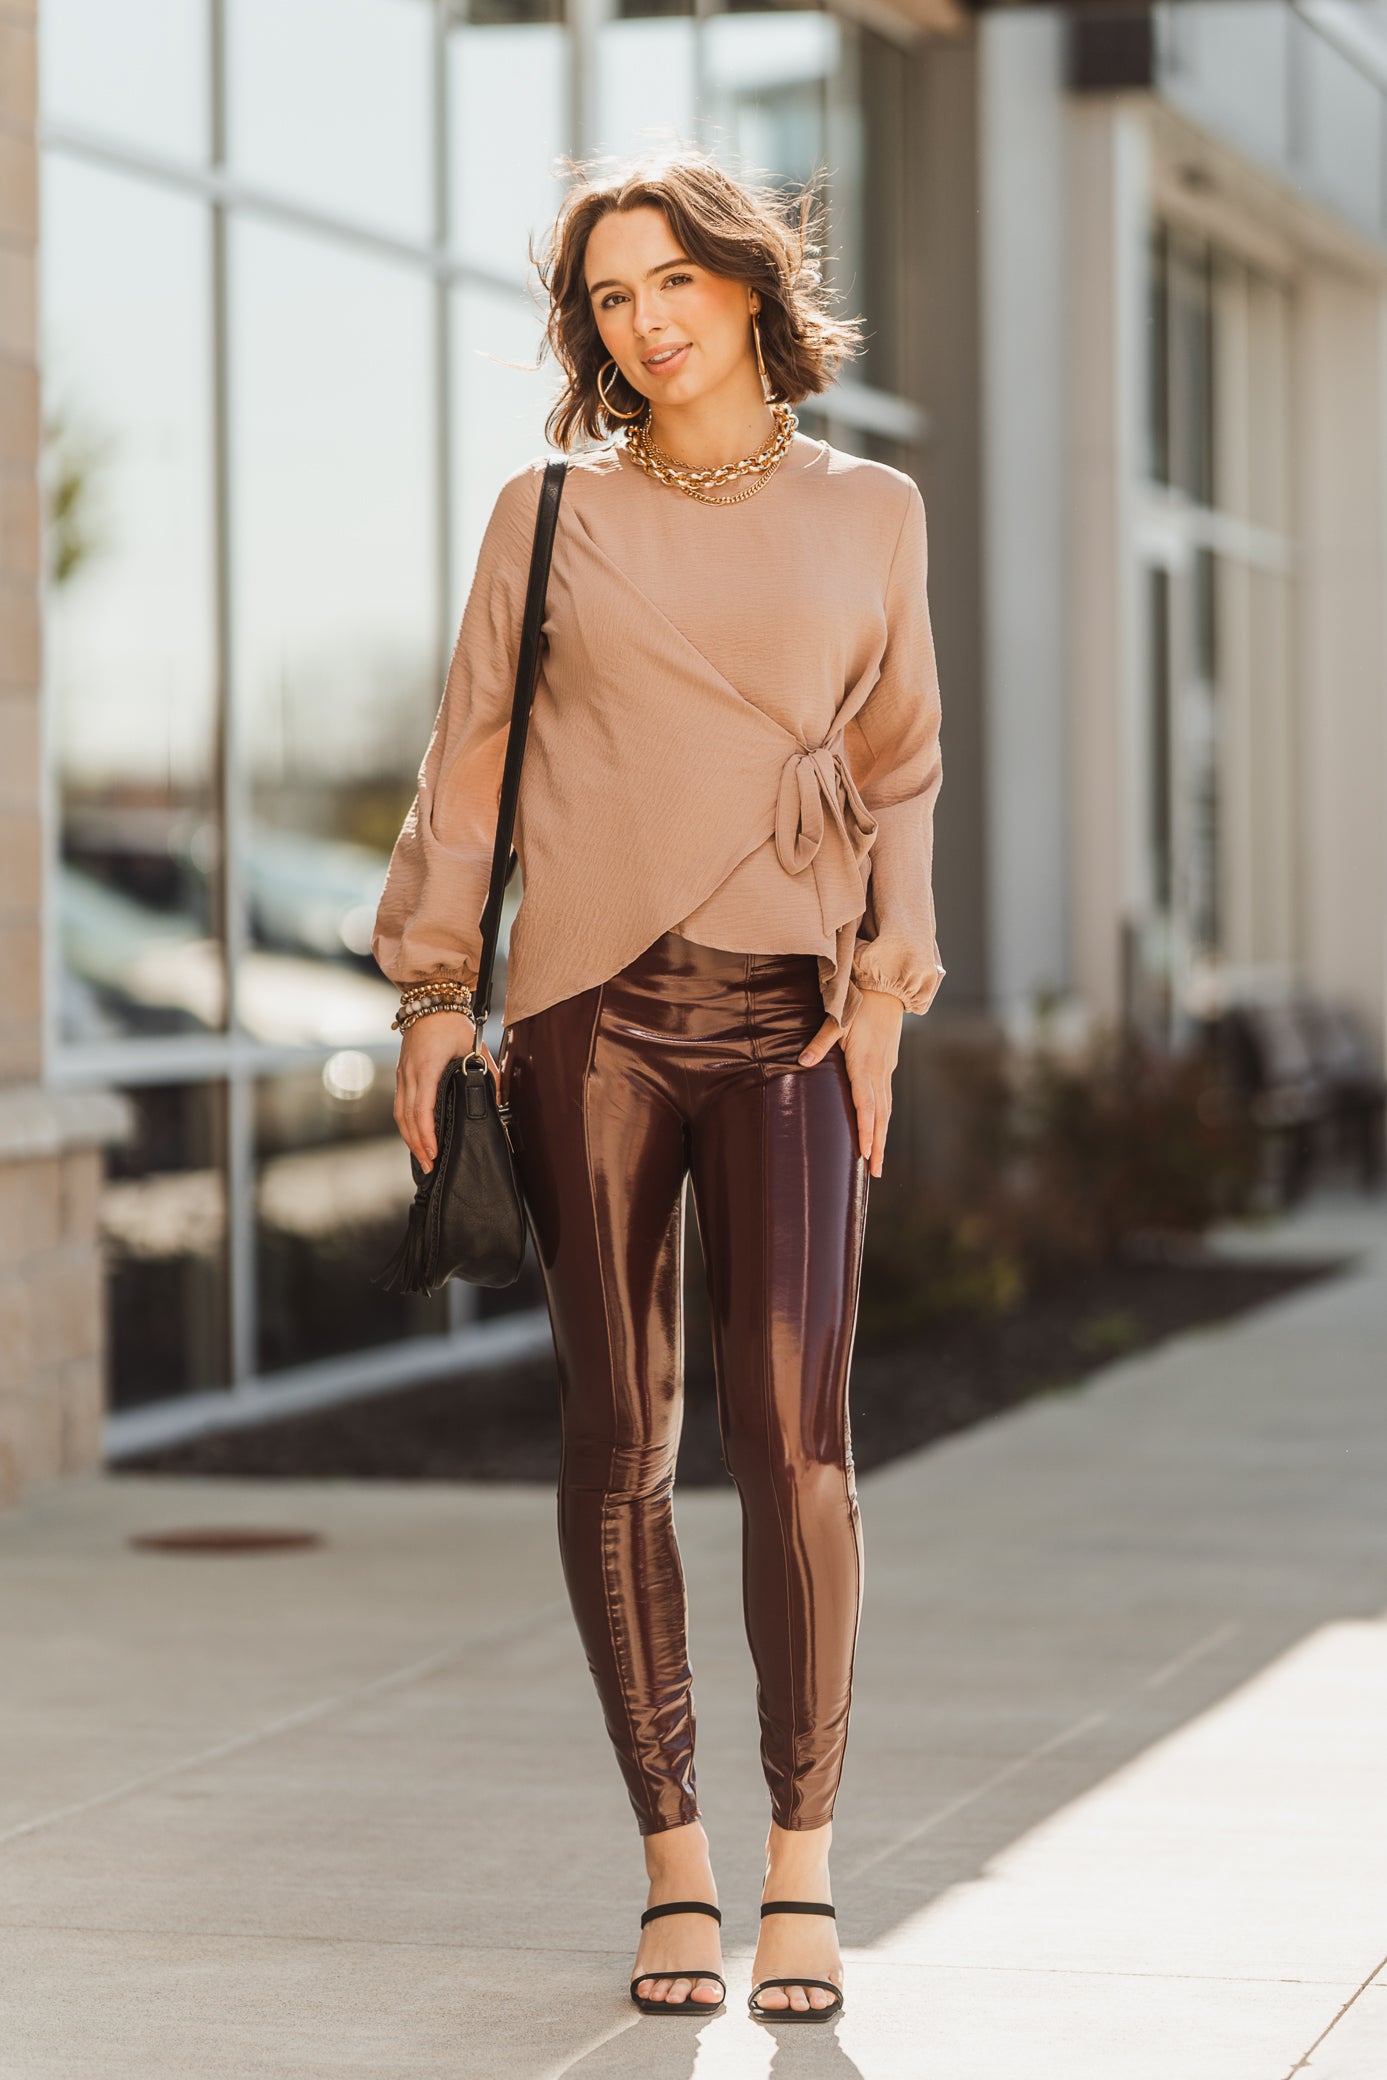 Spanx Faux Patent Leather Leggings - Ruby